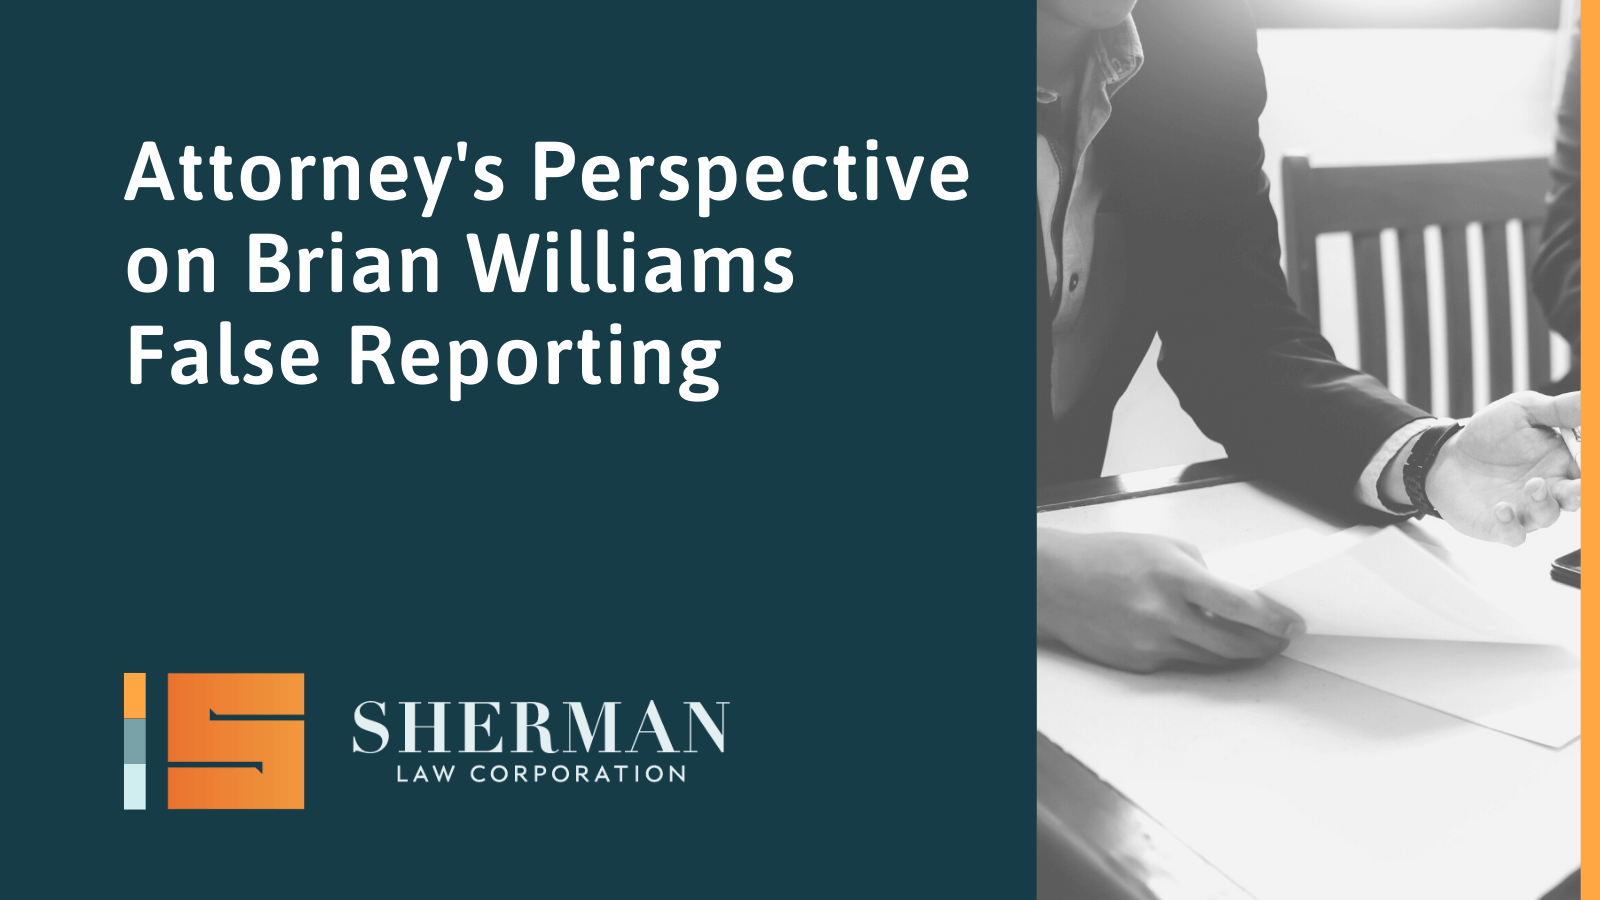 Attorney's Perspective on Brian Williams False Reporting- A Brief Case Study - sherman law corporation